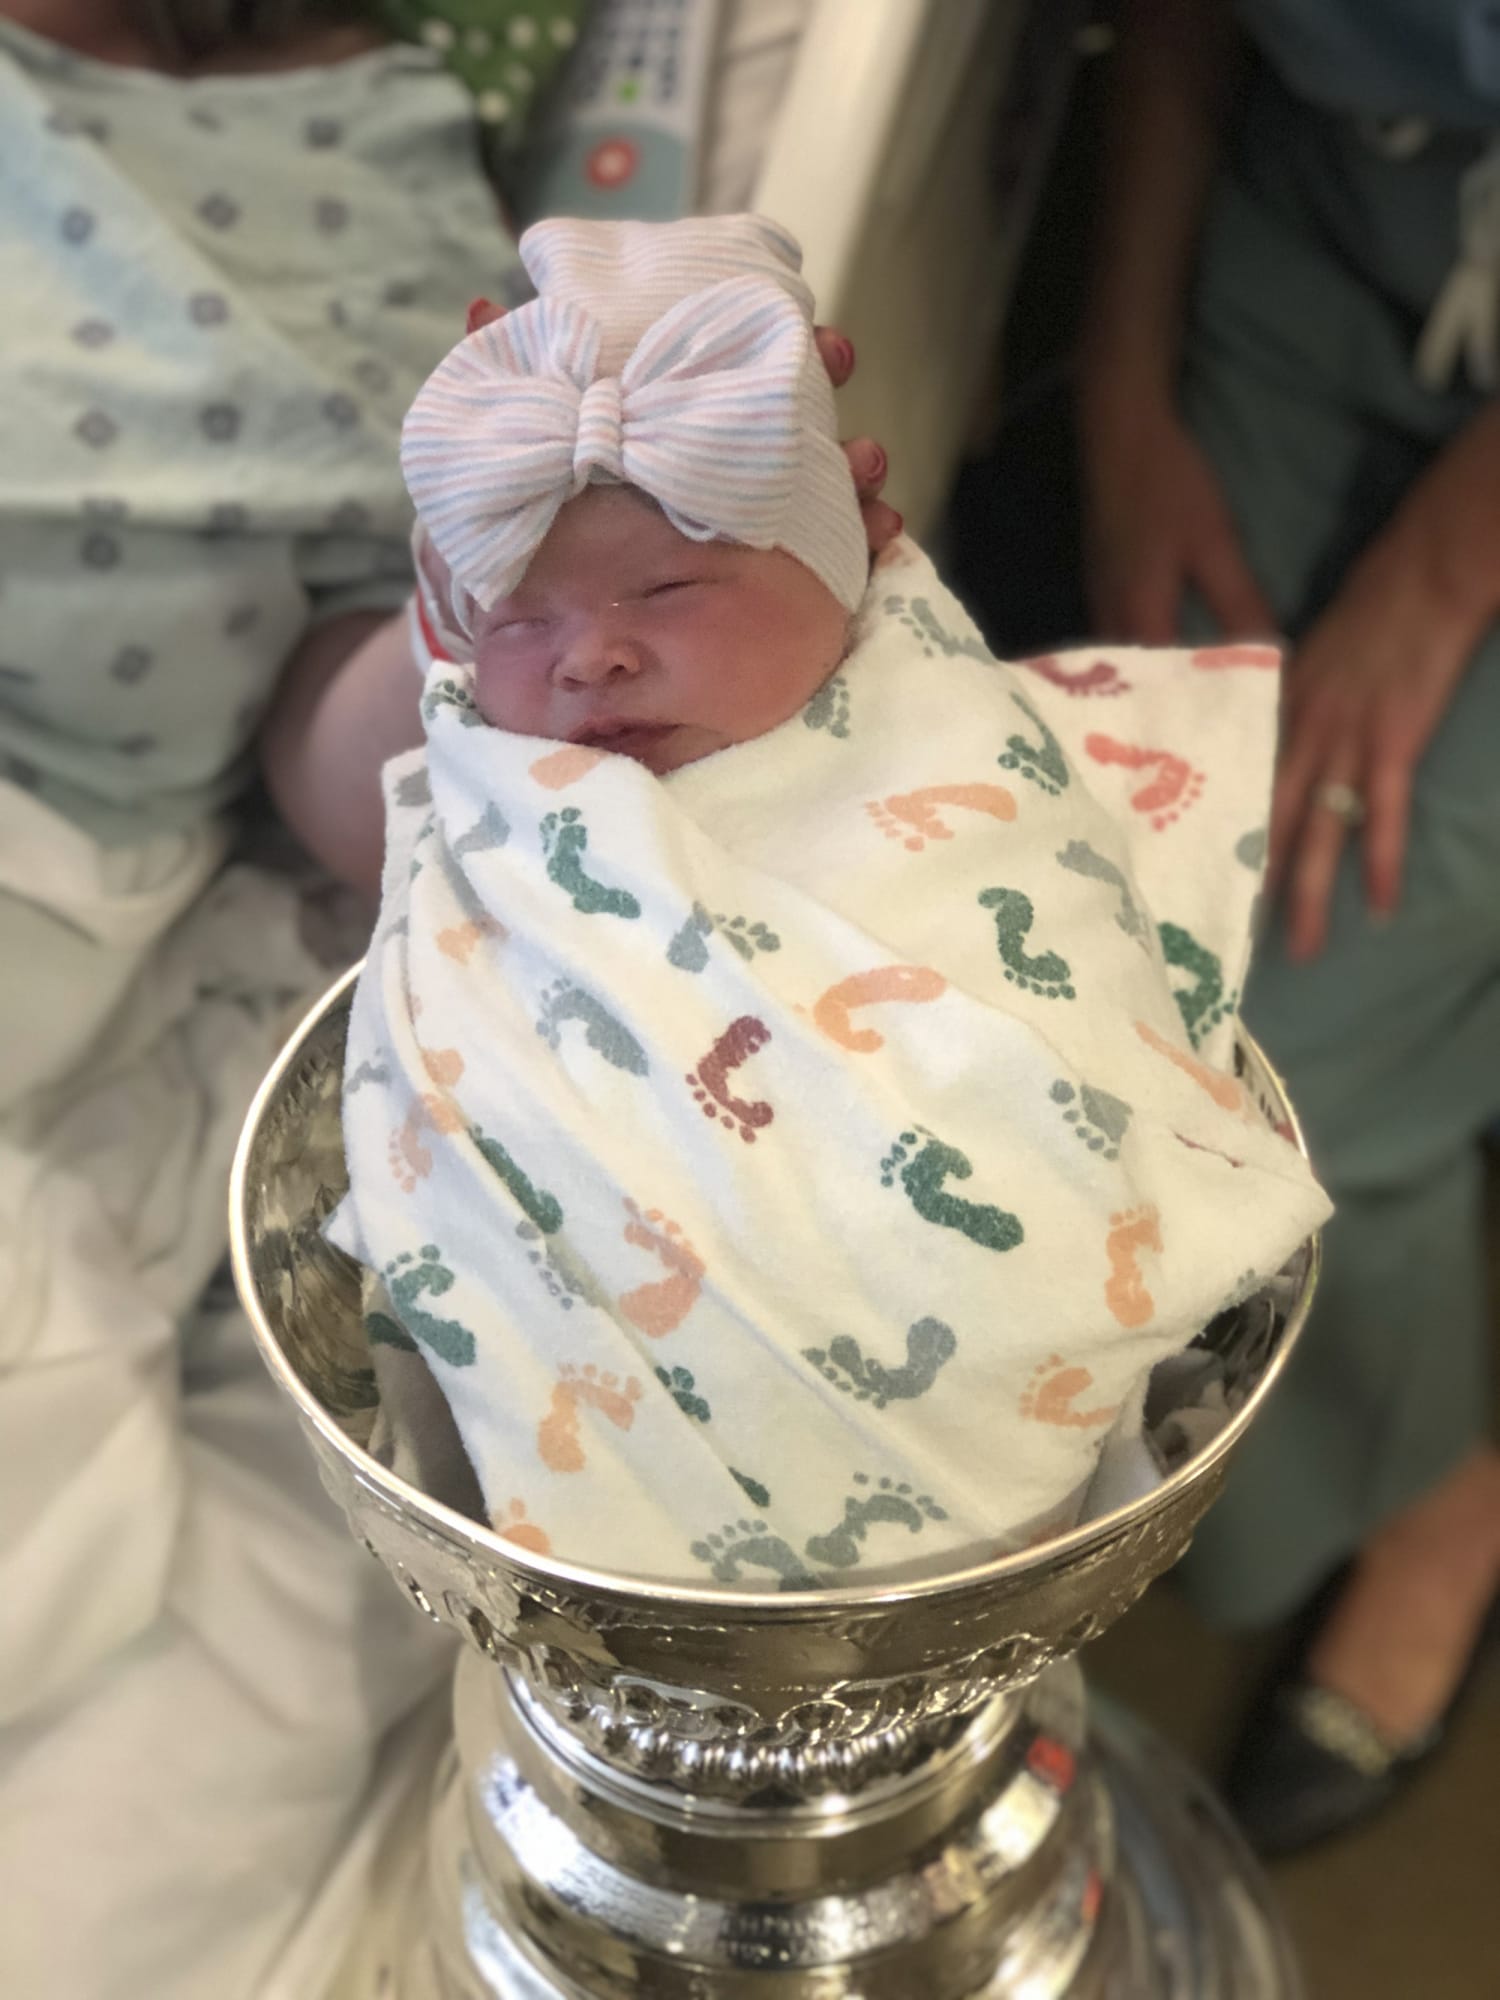 Newborn breaks record as youngest baby IN the Stanley Cup